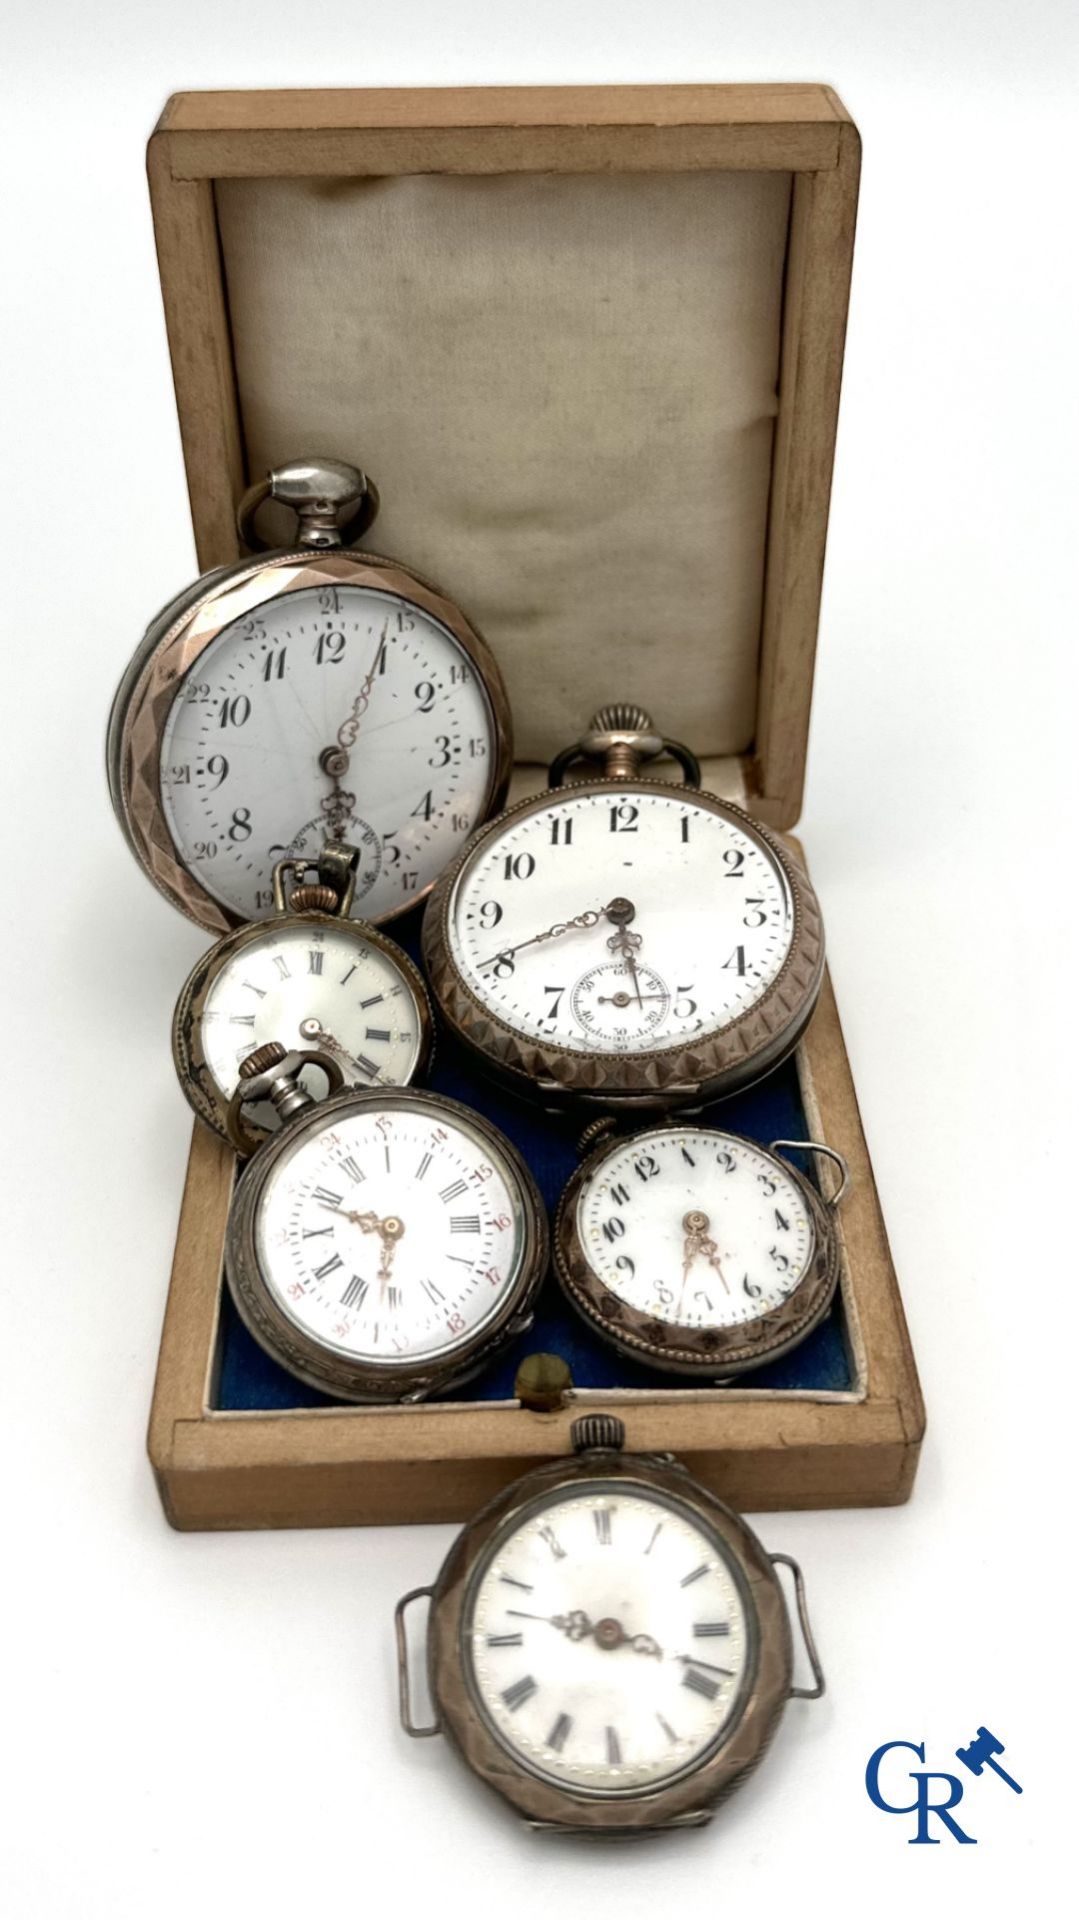 Watches: Lot consisting of 2 pocket watches and 4 ladies watches in silver (800°/00) - Image 4 of 4